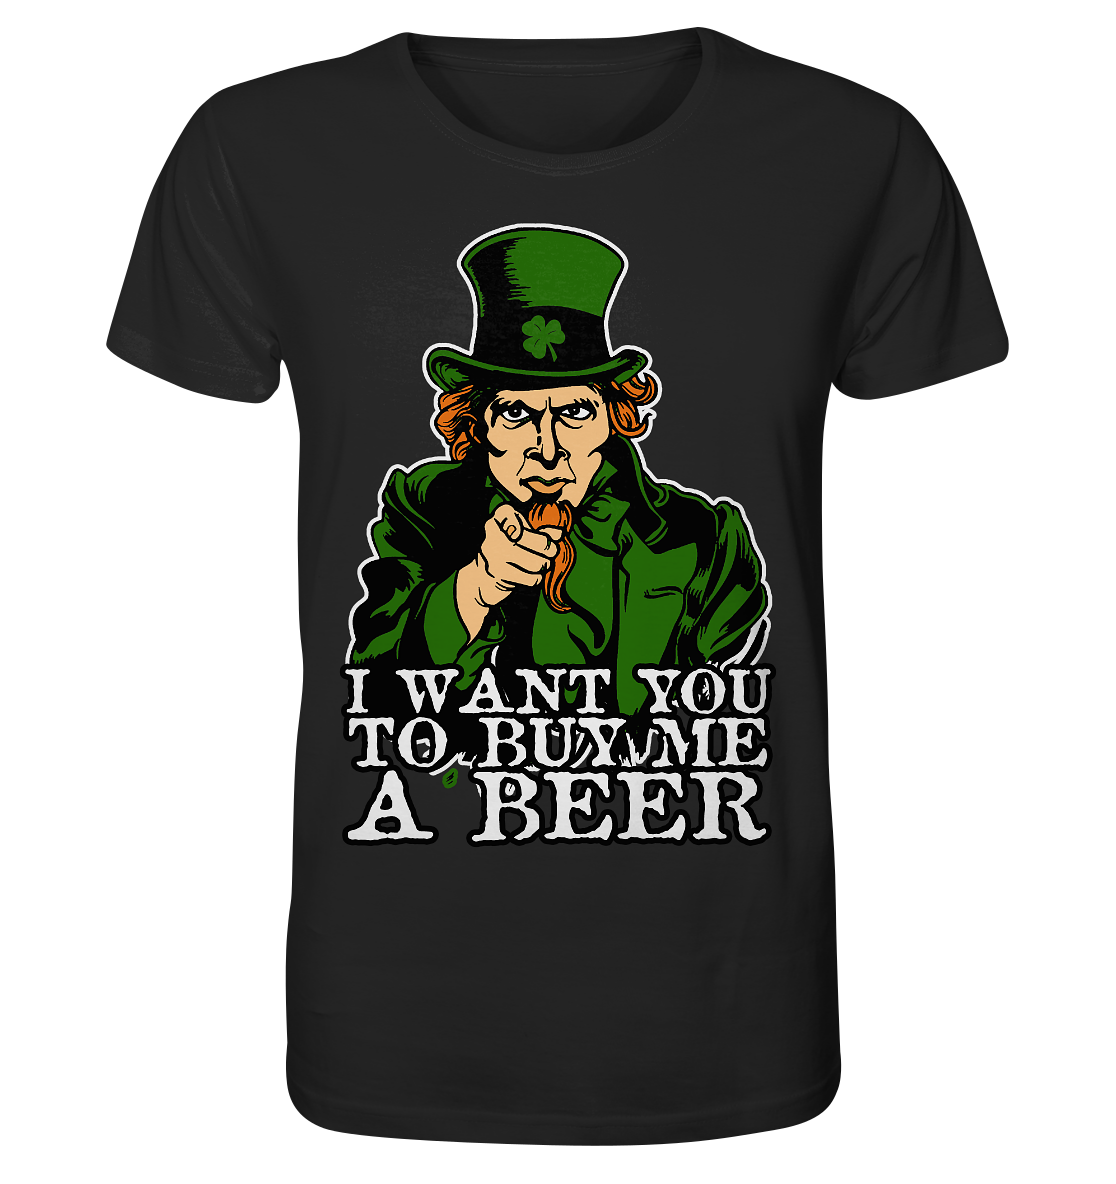 I Want You "To Buy Me A Beer" - Organic Shirt